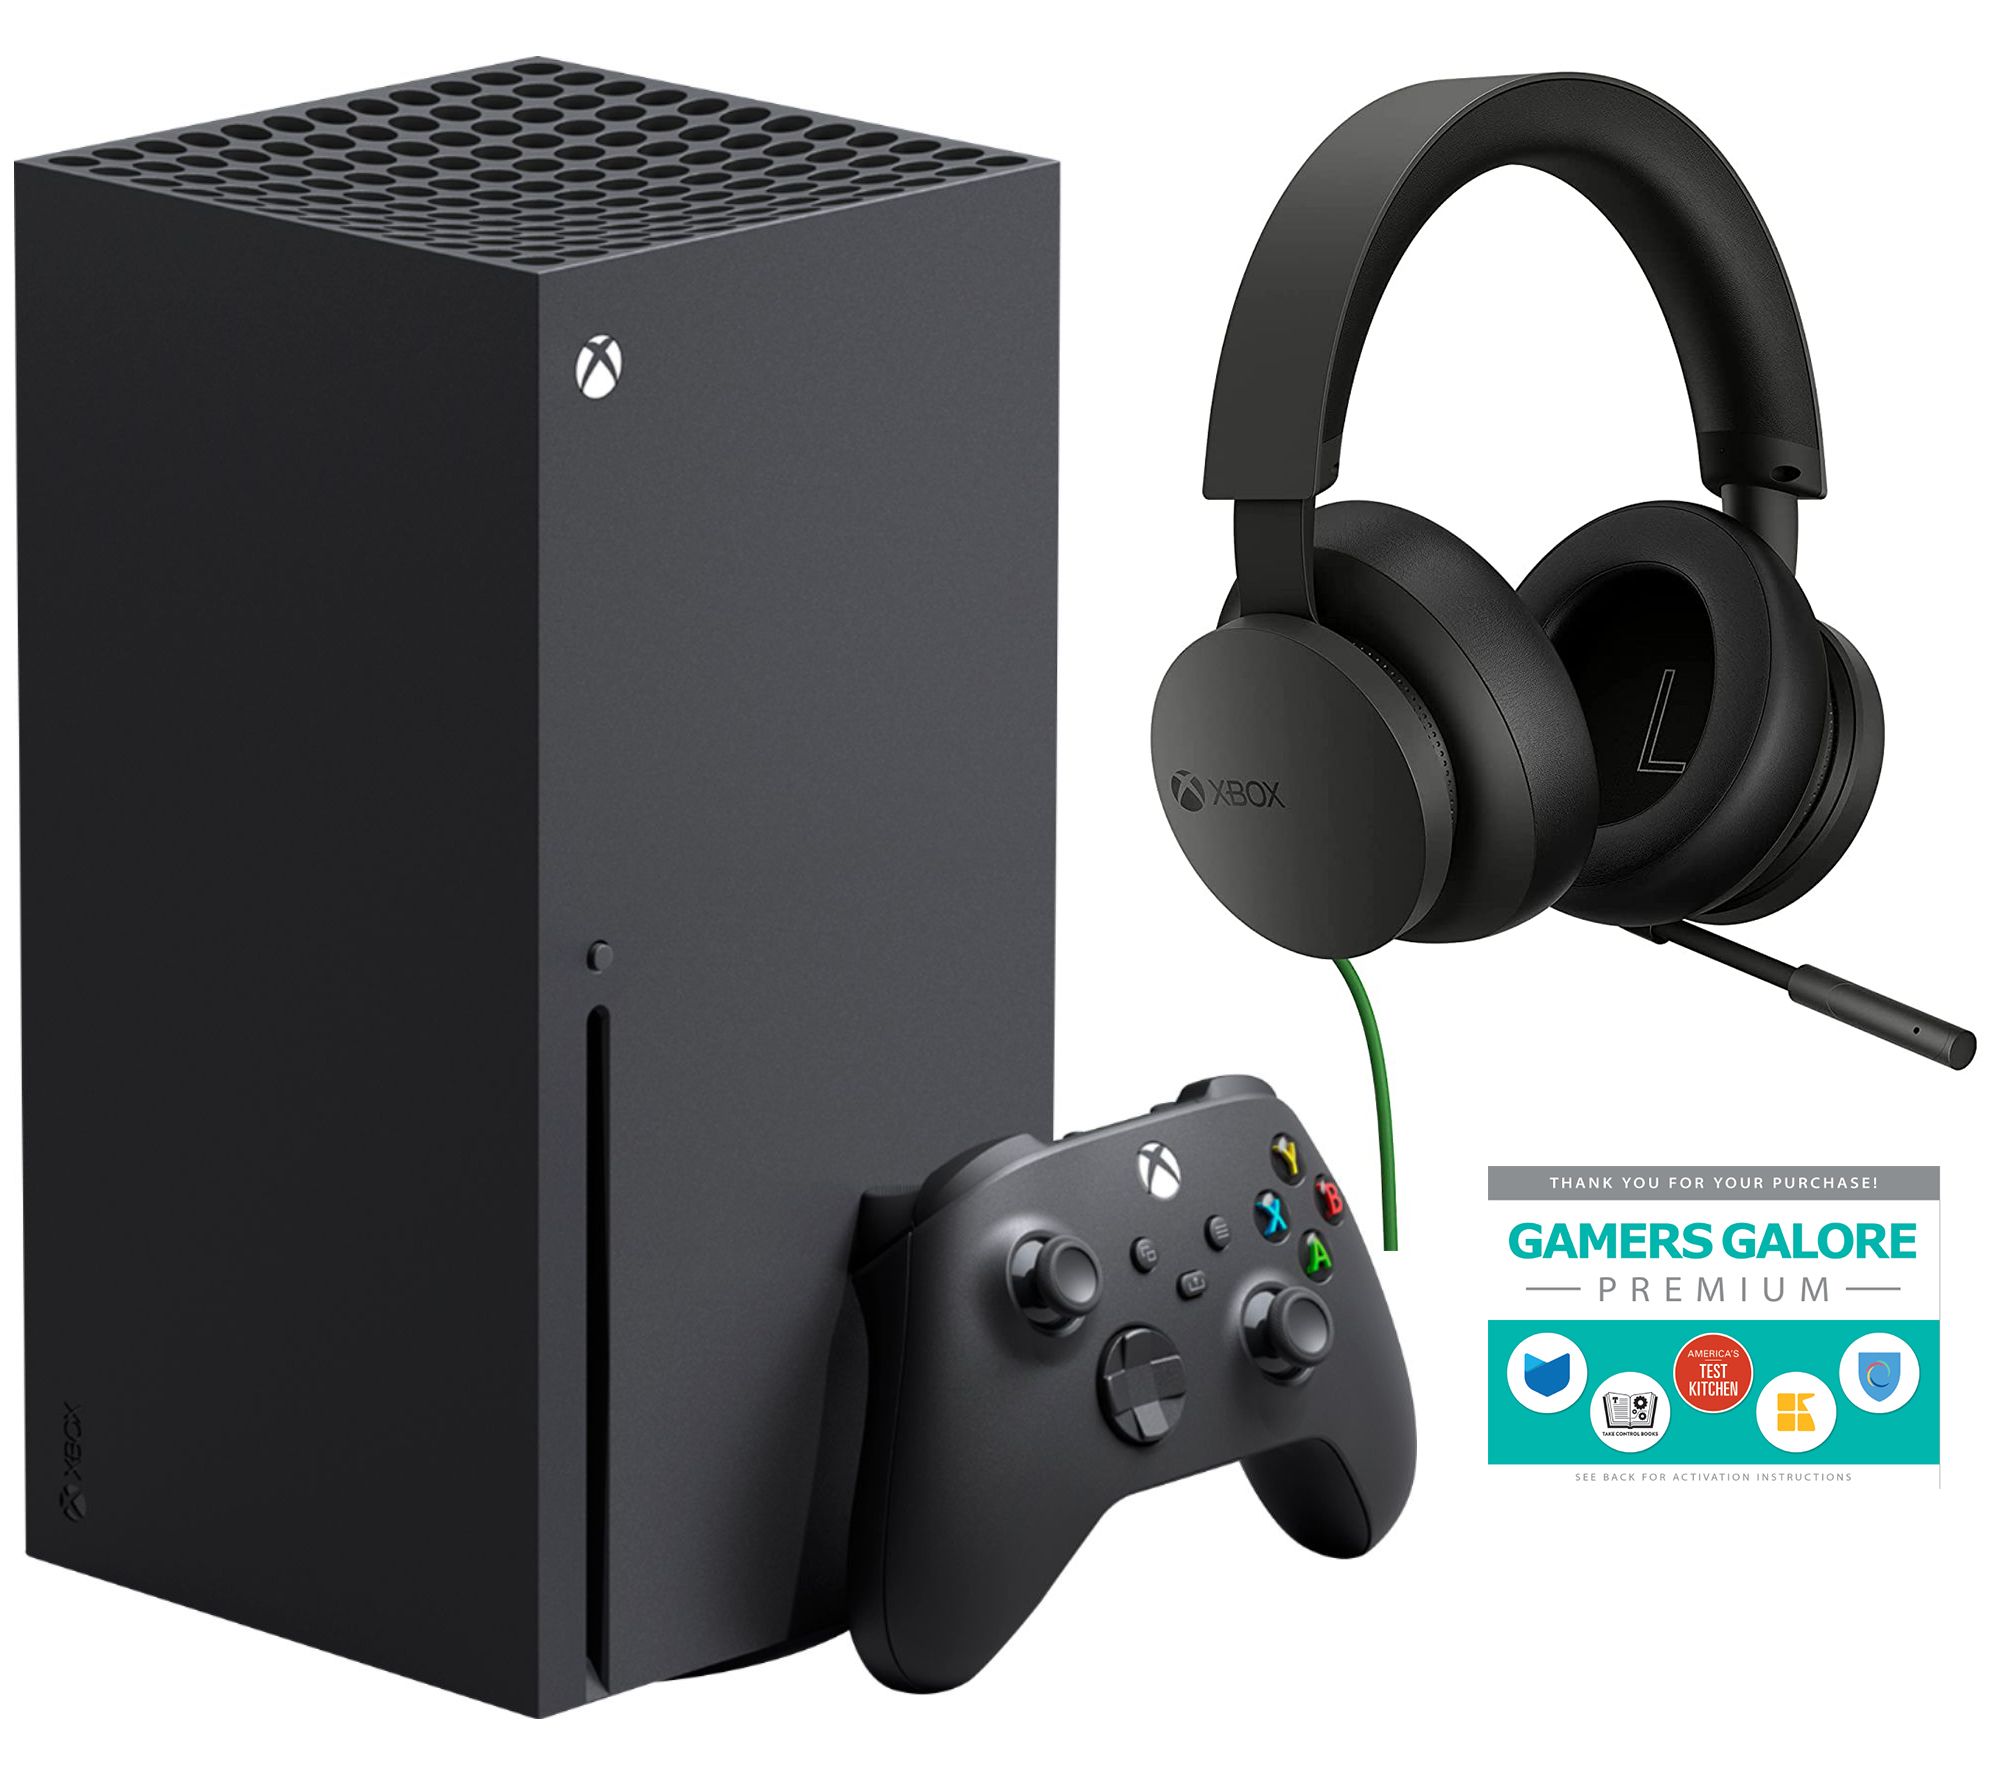 Xbox Series X Gaming Console with Headset and Gamers Voucher - QVC.com